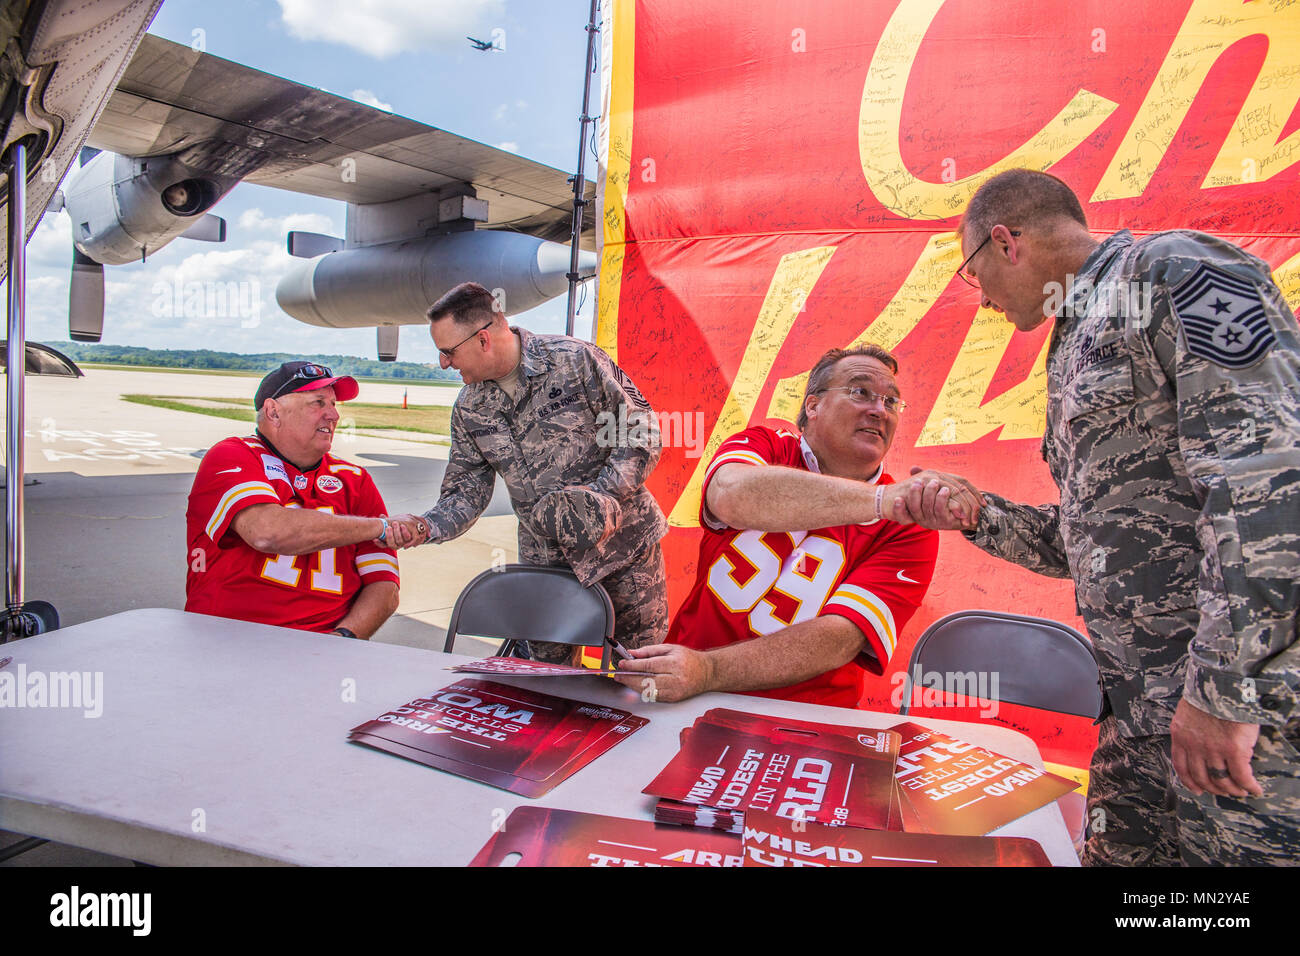 Tony Adams, retired Kansas City Chiefs NFL player (left) shakes hands with Chief Master Sgt. Harold Hutchinson, command chief master sergeant of North American Aerospace Defense Command and U.S. Northern Command, and Gary Spani, retired KC Chiefs player (second from right) shakes hands with Chief Master Sgt. Randy Miller, command chief master sergeant of the 139th Airlift Wing, Missouri Air National Guard, during a visit to Rosecrans Air National Guard Base in St. Joseph, Mo., August 15, 2017. The visit was part of a McDonald’s Restaurant Heart of America Co-Op 15-stop tour for local charities Stock Photo